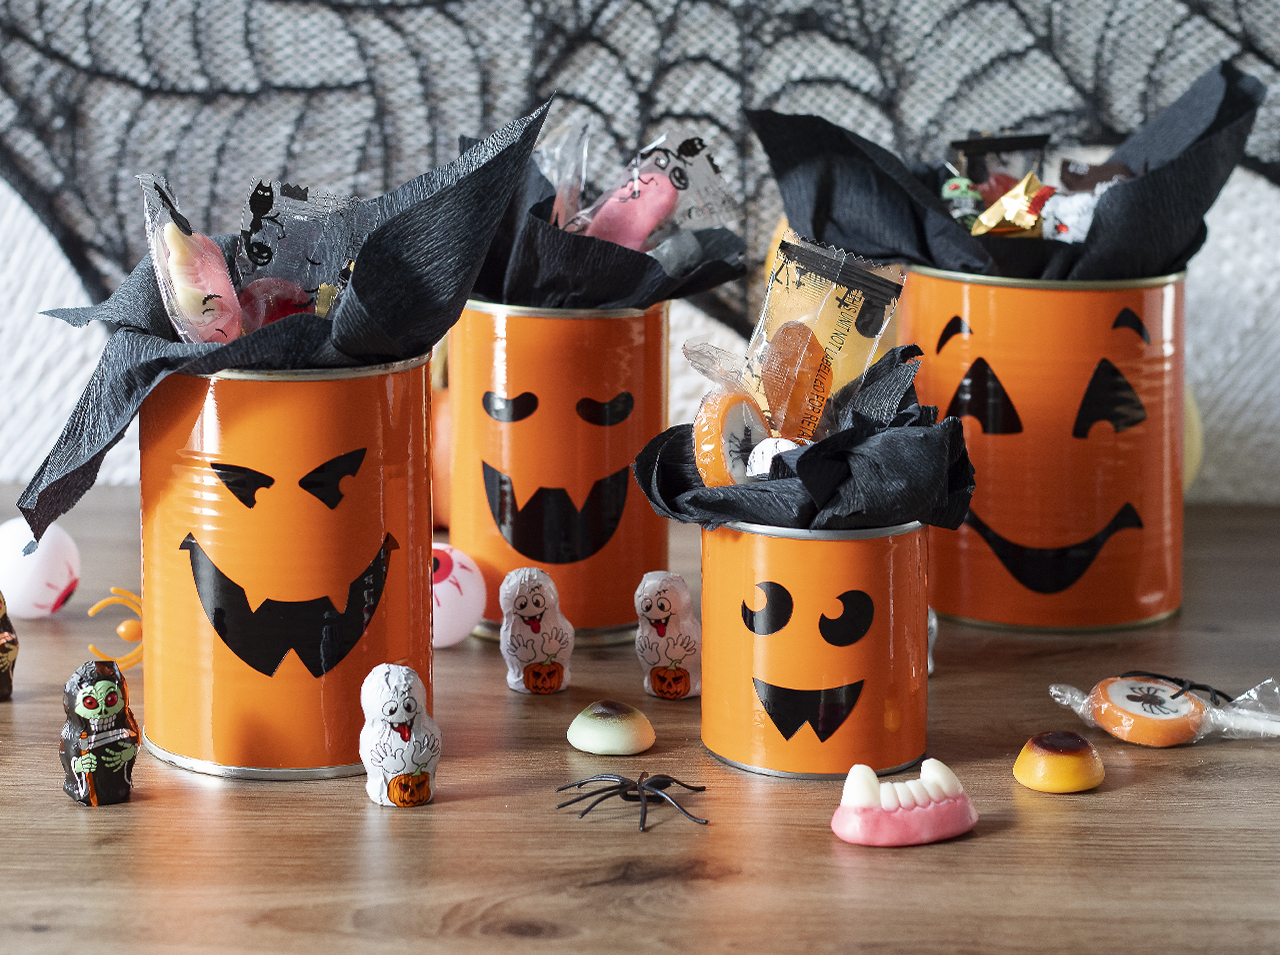 Upcycling DIY: Tin cans with d-c-fix® adhesive foils orange and black in the look of Halloween pumpkins with faces.